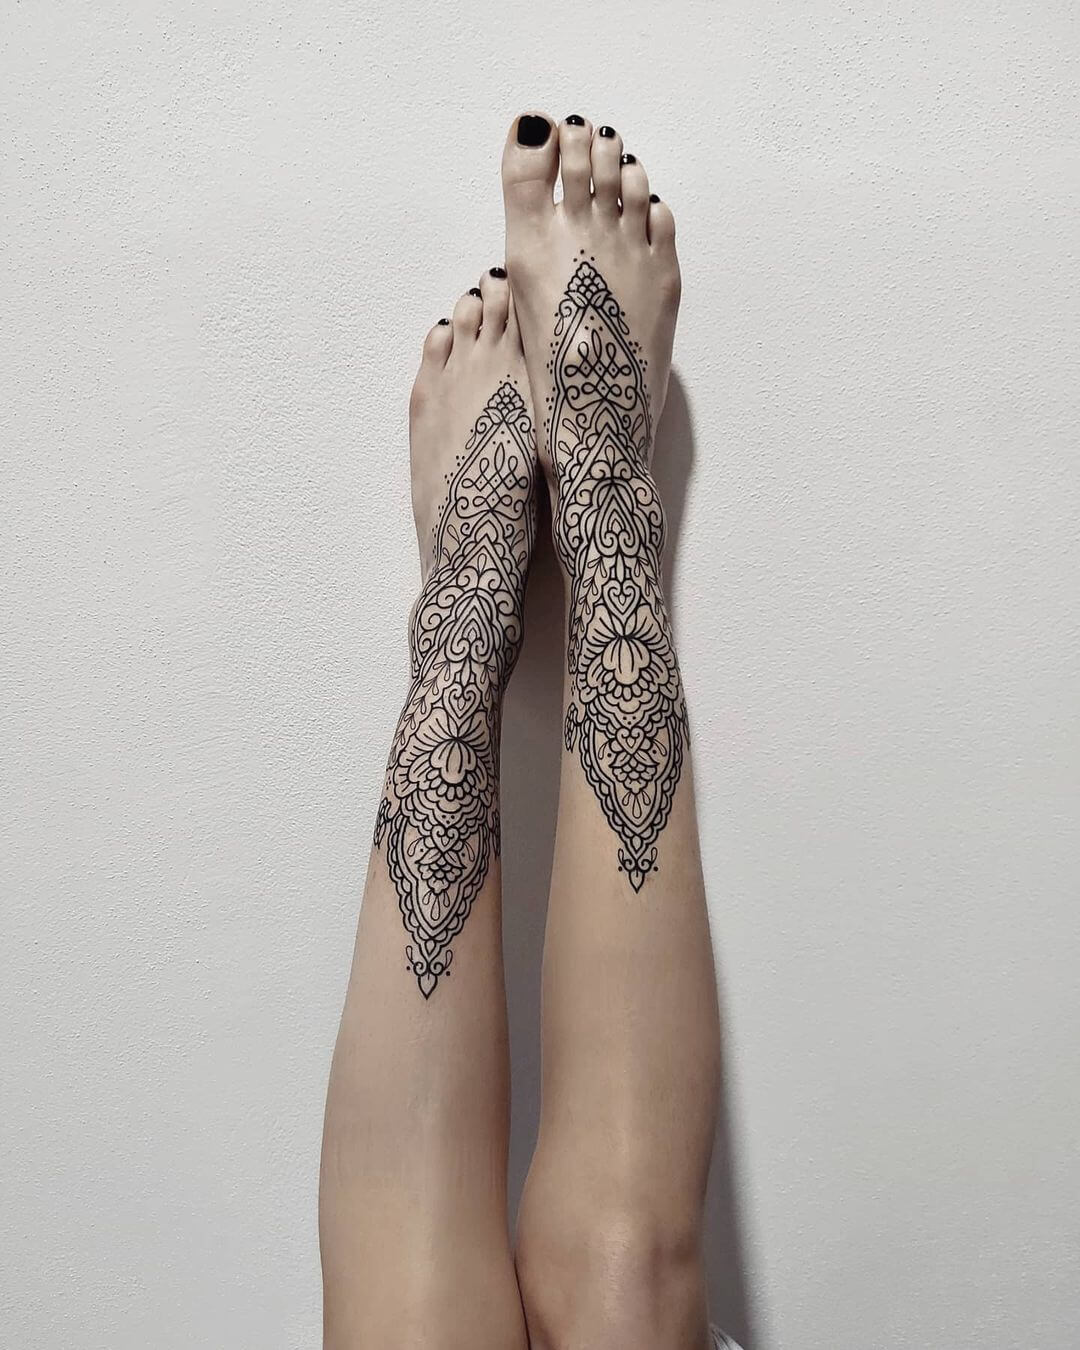 awesome Foot tattoo